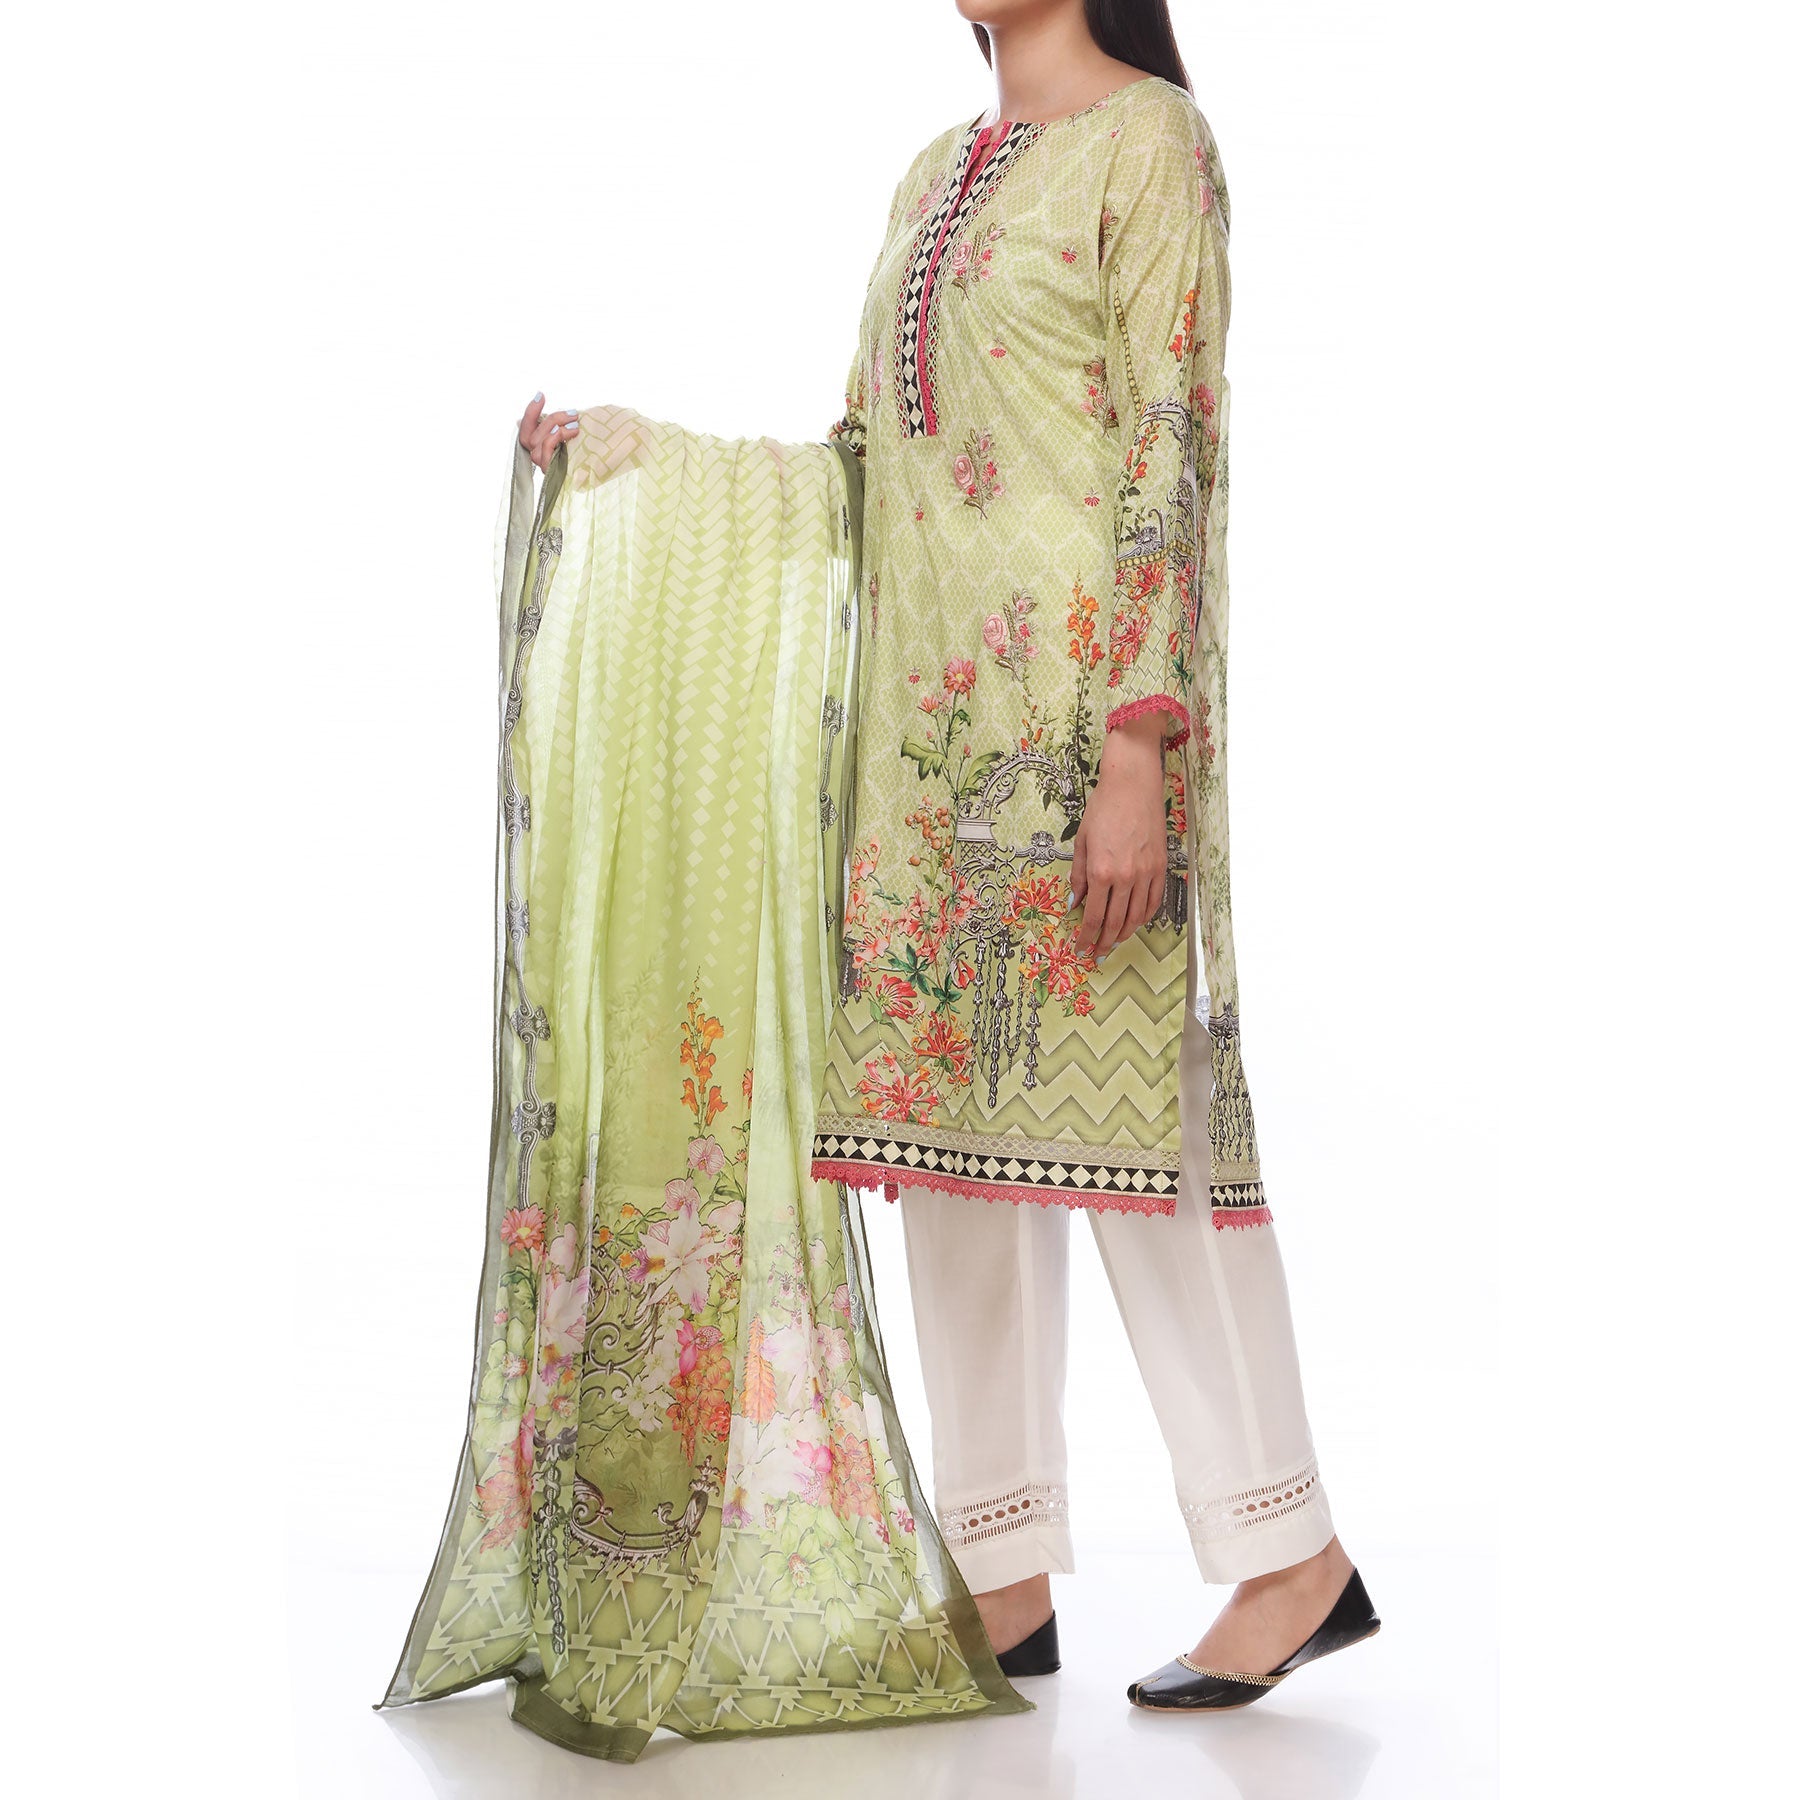 Digital Printed Lawn Shirt With Embroiderd Motifs Front
Digital Printed Lawn Duppata